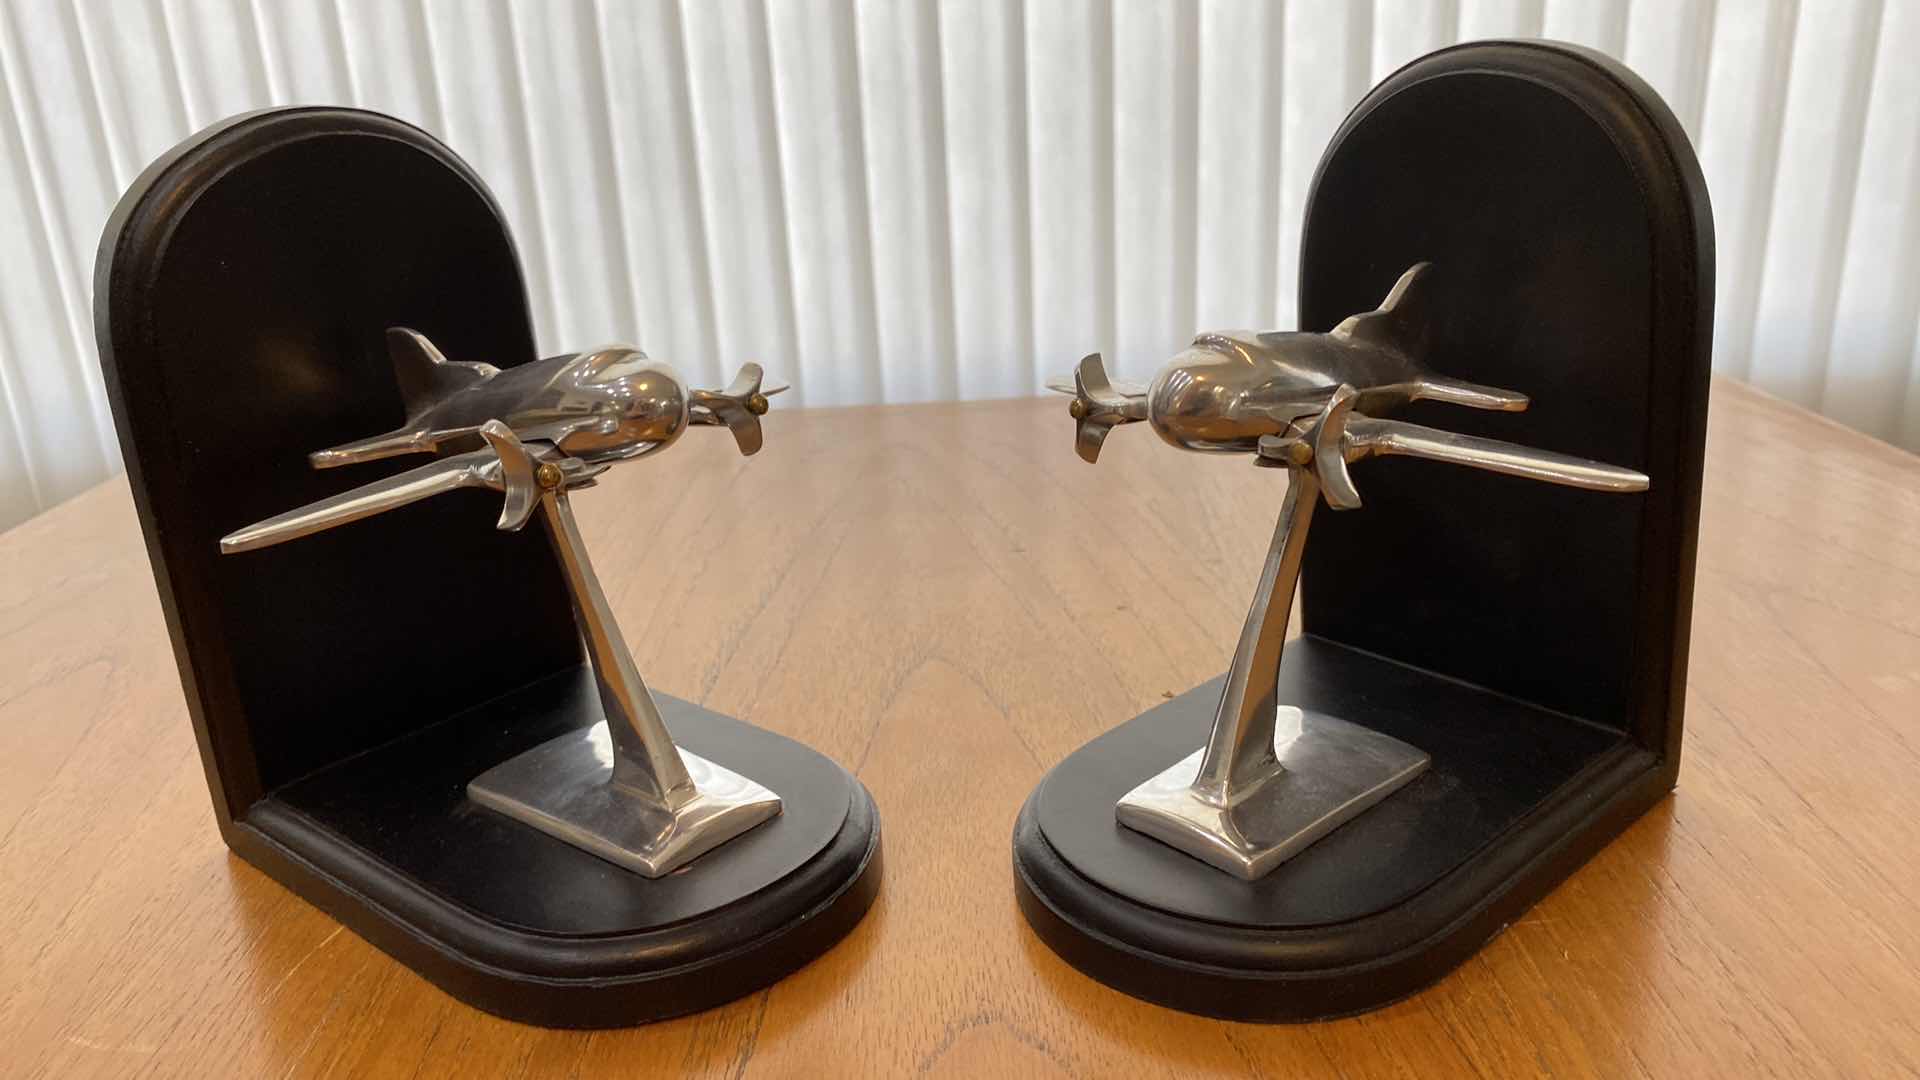 Photo 1 of METAL AND WOOD AIRPLANE BOOKENDS 6” x 7”